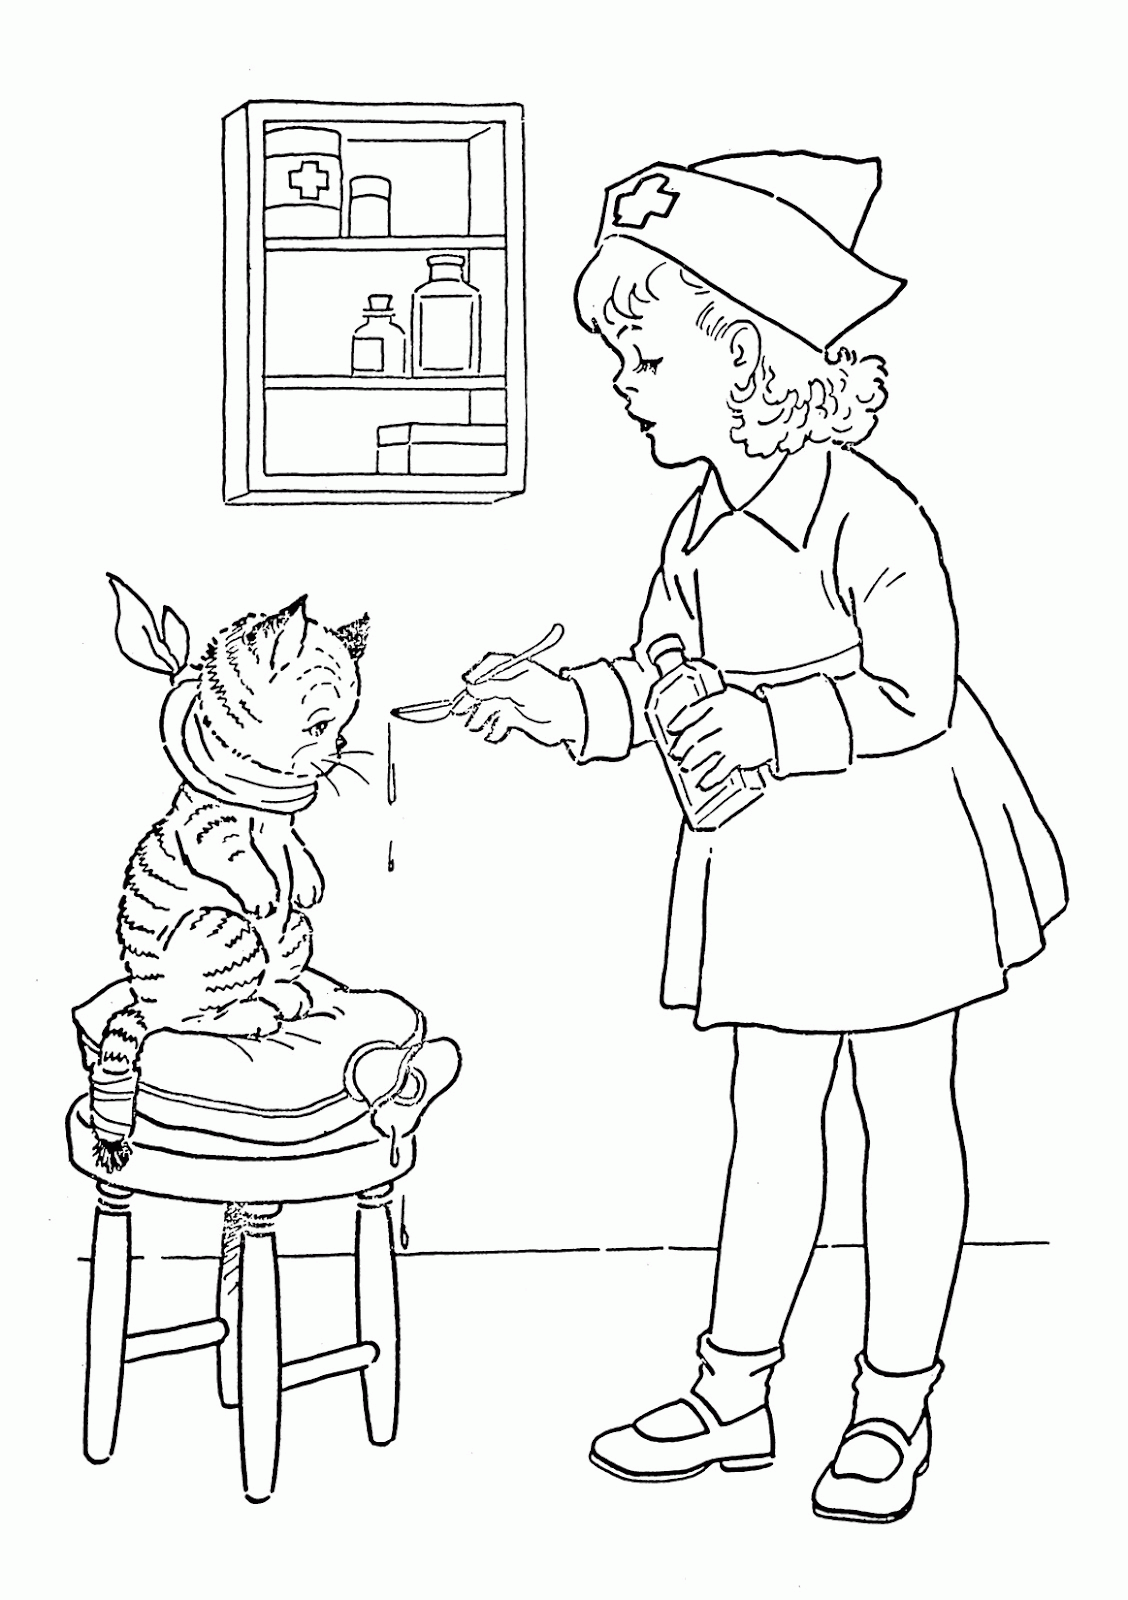 Get Better Soon Coloring Pages Religious Get Well Coloring Pages ...